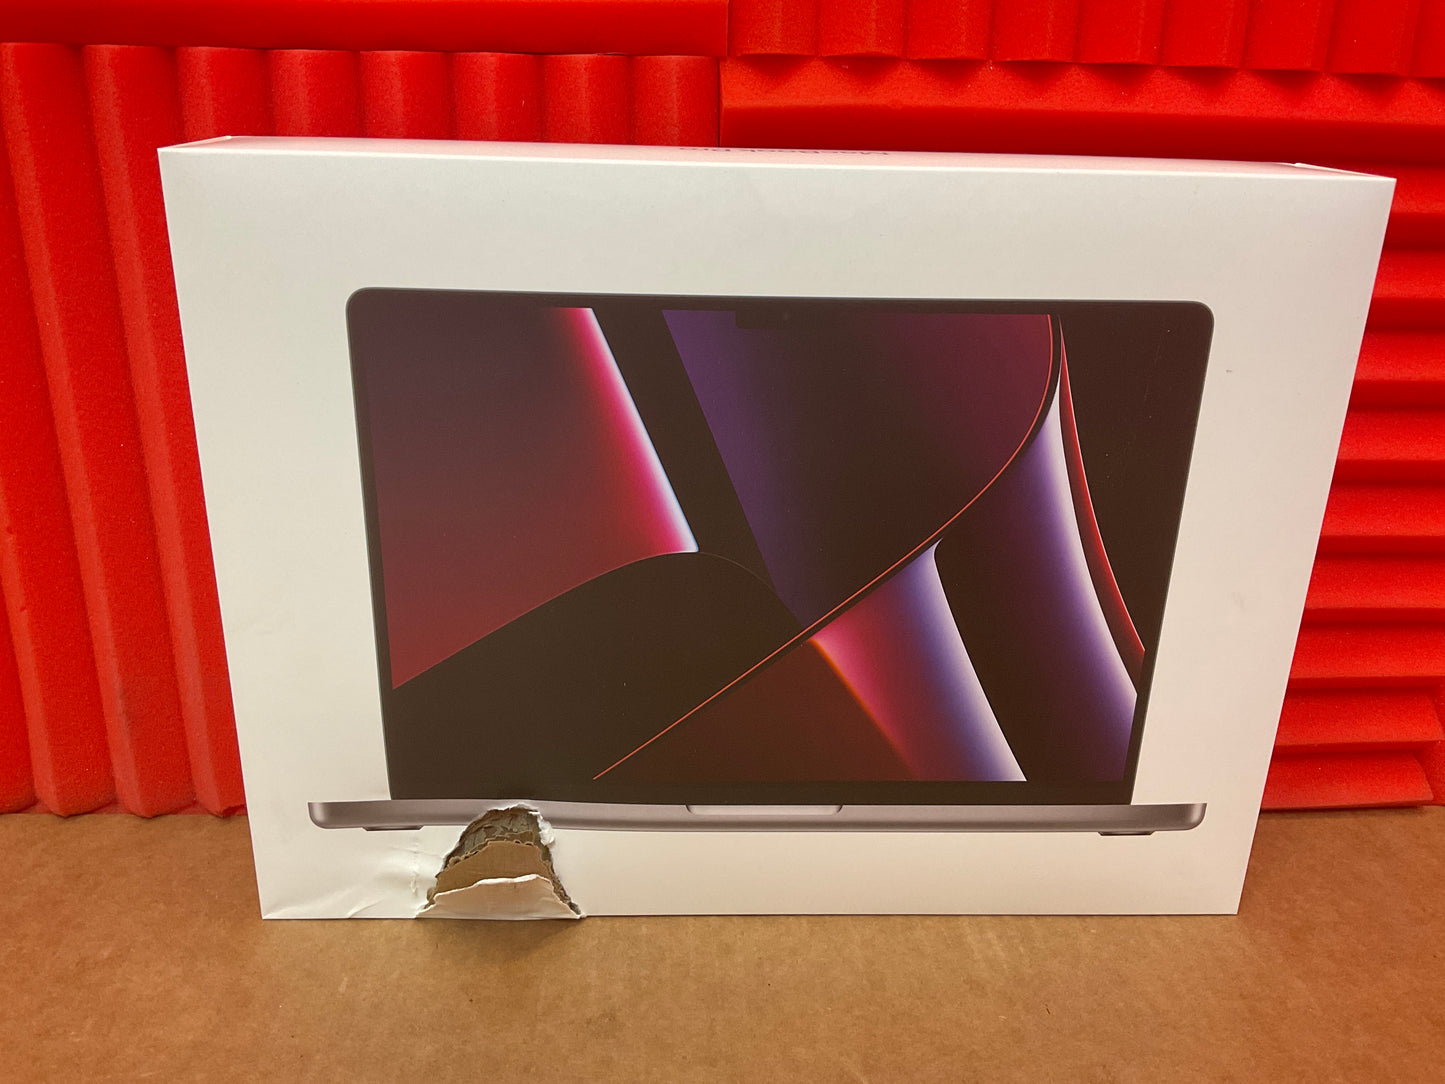 ♥ New, Factory Sealed - MacBook Pro 14.2in M2 Pro 12/19-Core 32GB/512GB Space gray Z17G002HU(2023)